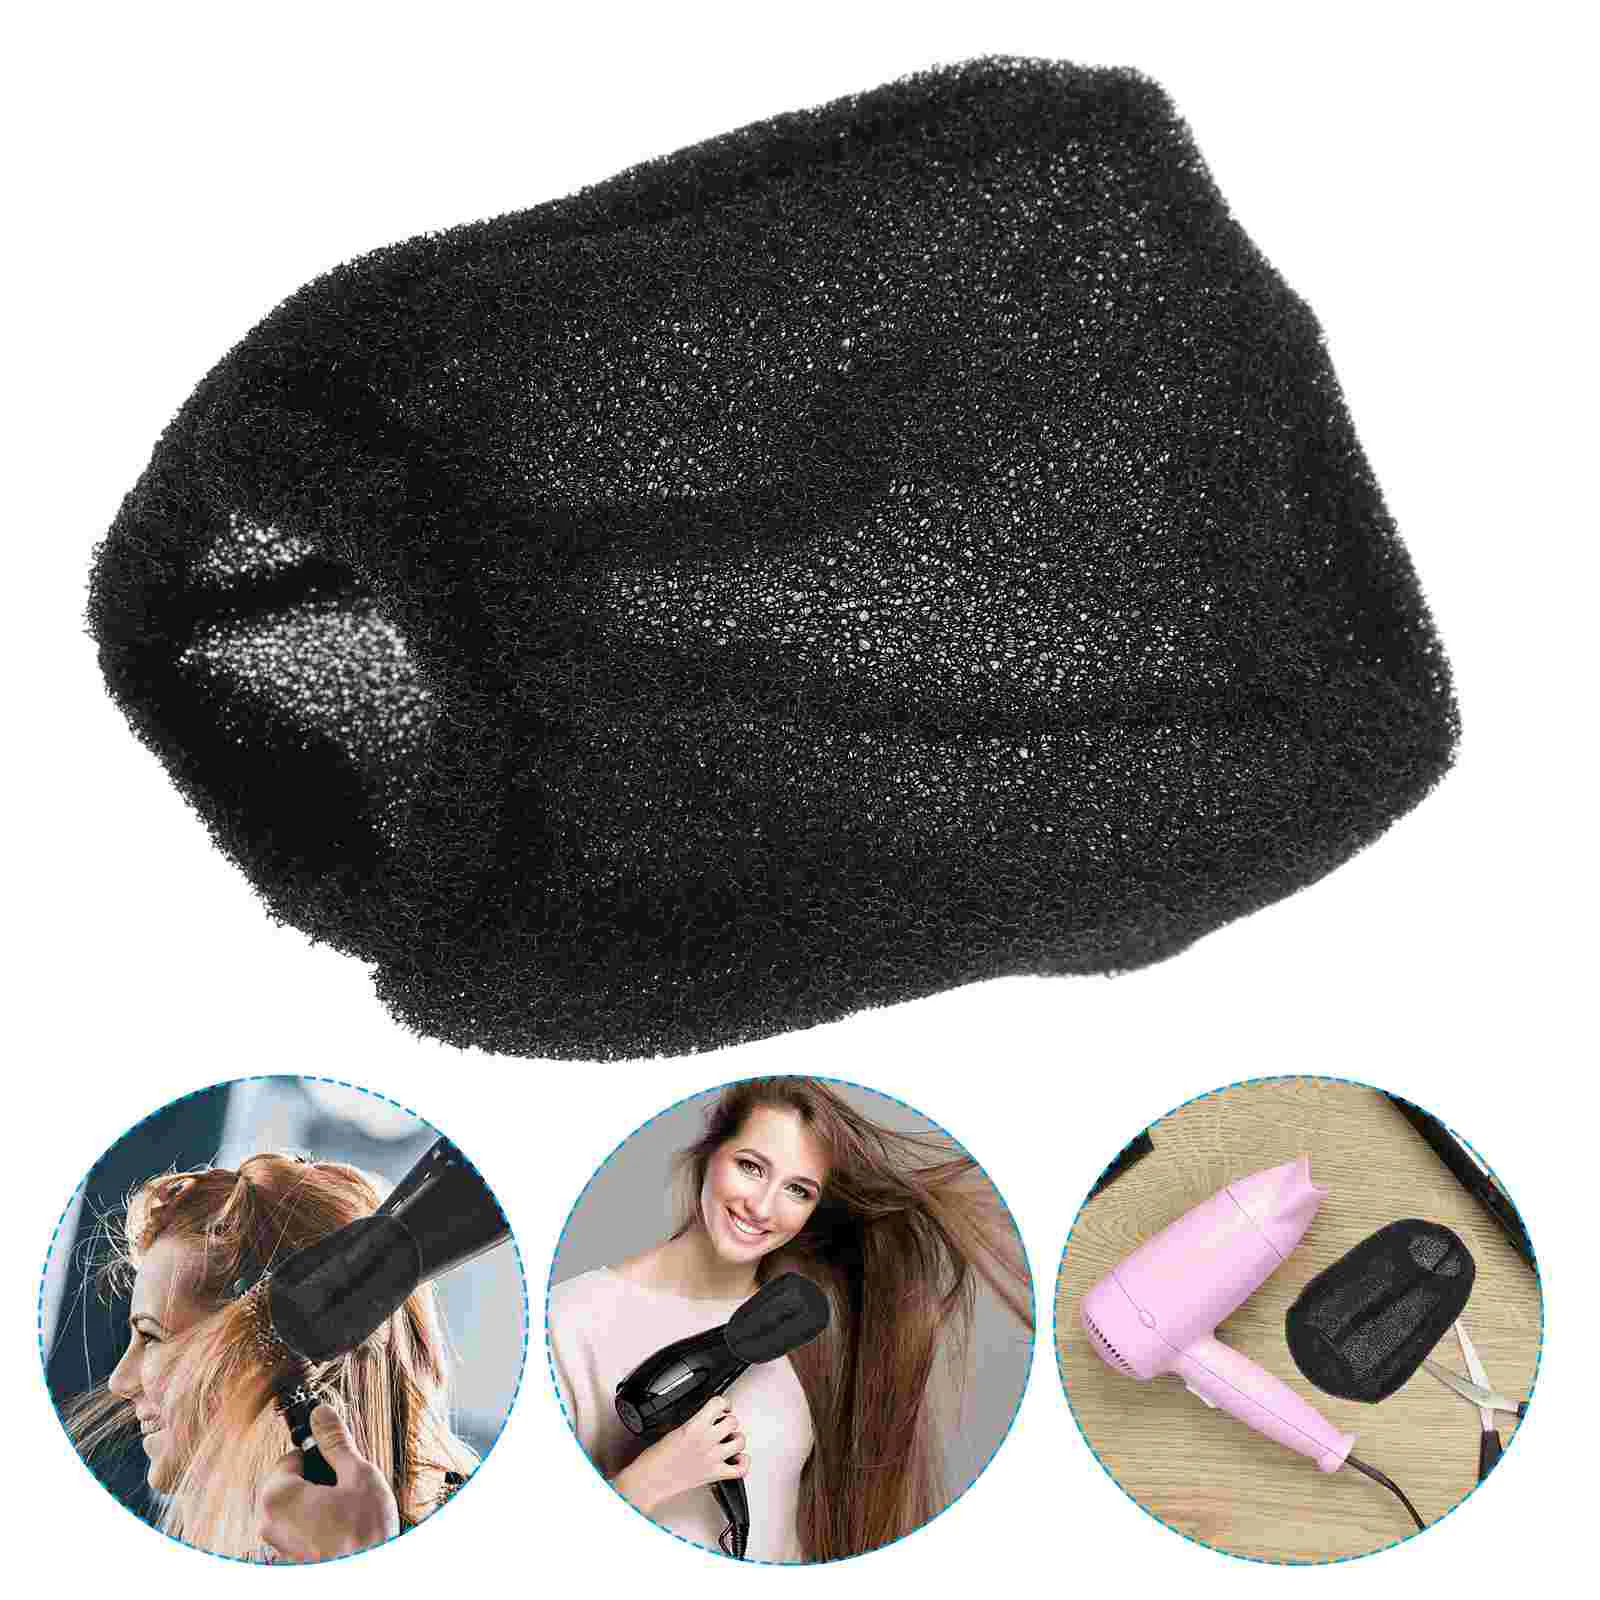 

Diffuser Hair Dryer Hair Dryer Curly Hair Blow Dryers Attachment Cover Travel Diffuser No Hair Damage Wavy Hair Dryer Sock